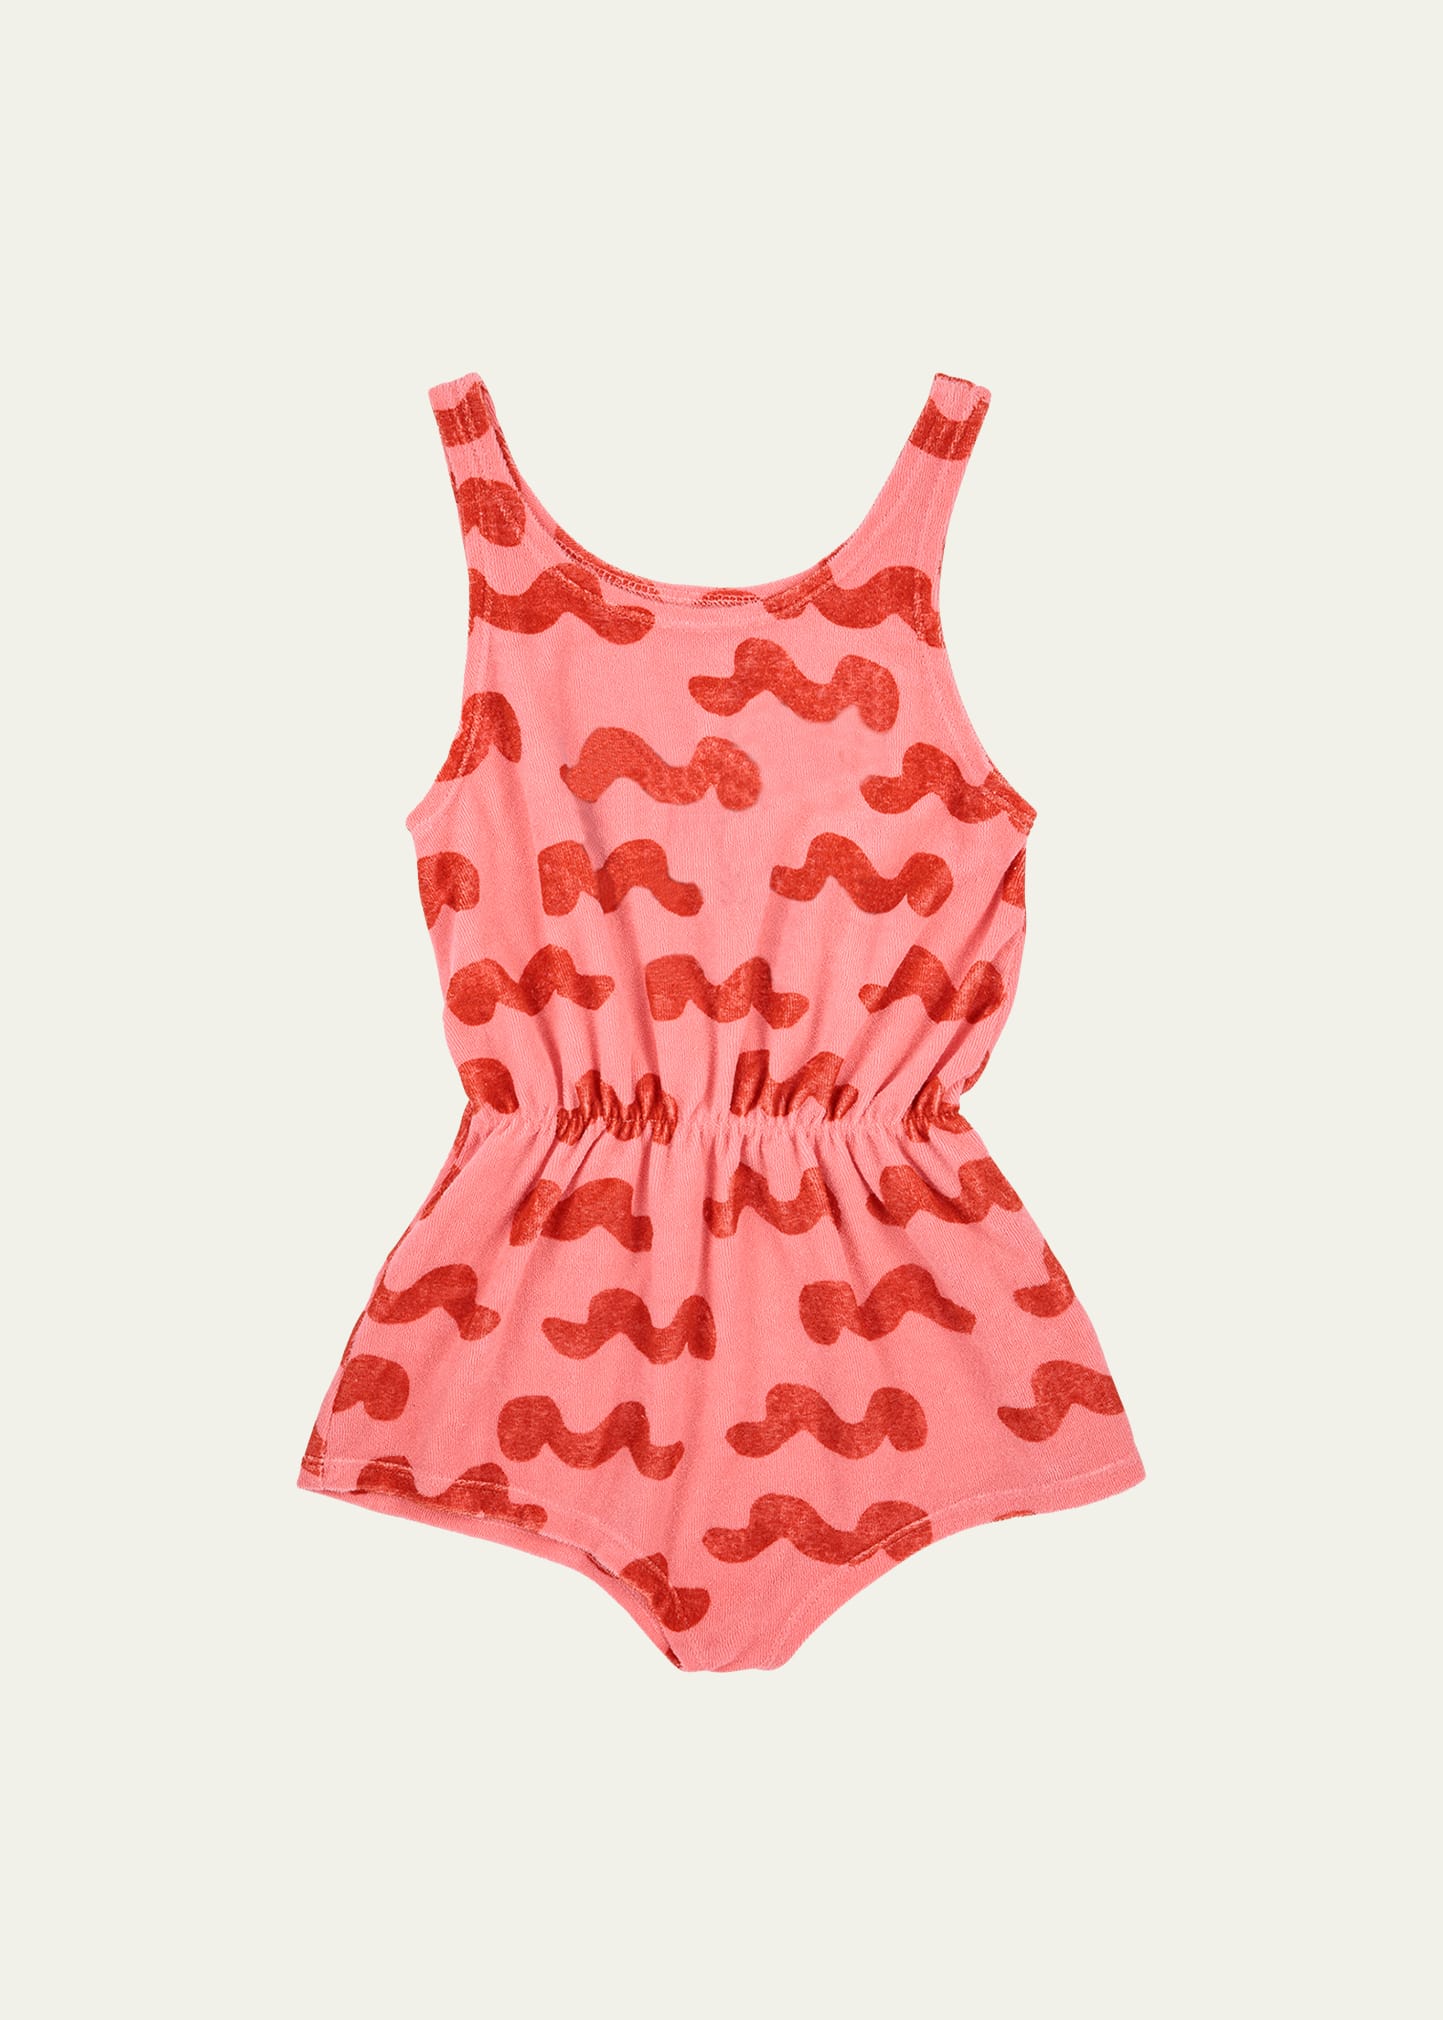 Bobo Choses Girl's Waves Terry Playsuit, Size 2-13